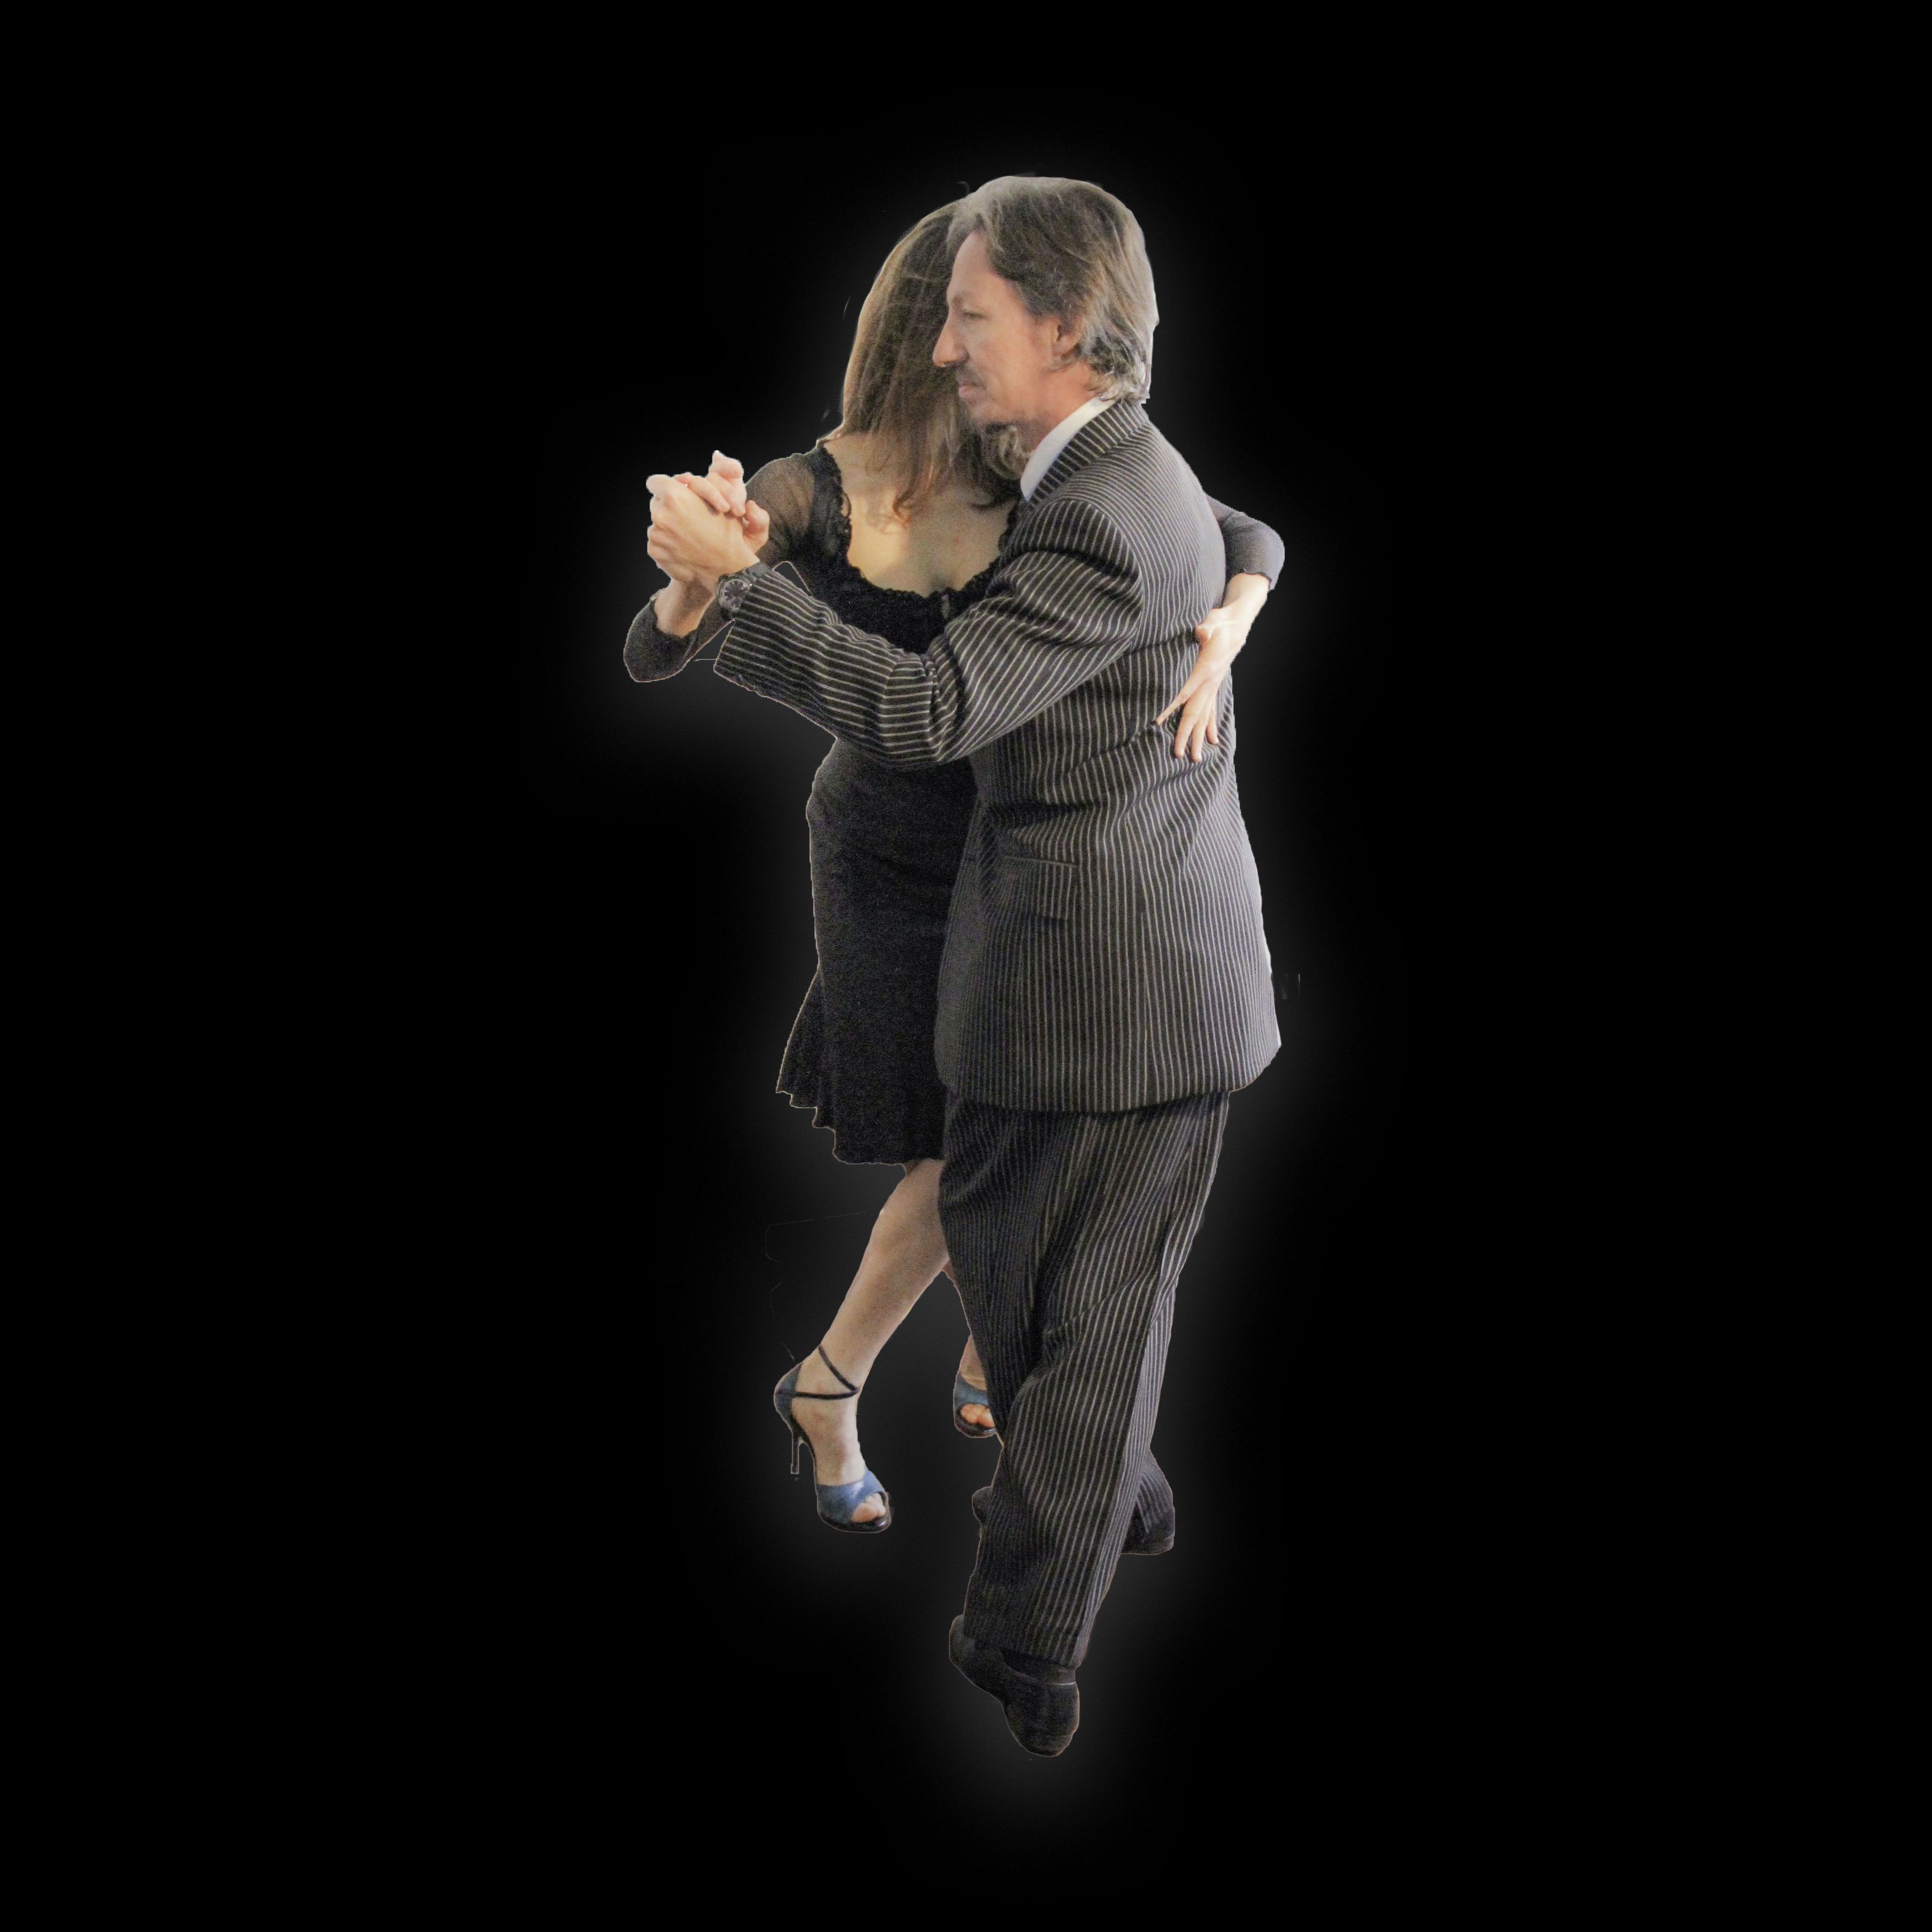 Discover Argentine Tango and Buenos Aires with Marcelo Solis. Classes, lessons,, tours and milongas in a trip that will change your life.